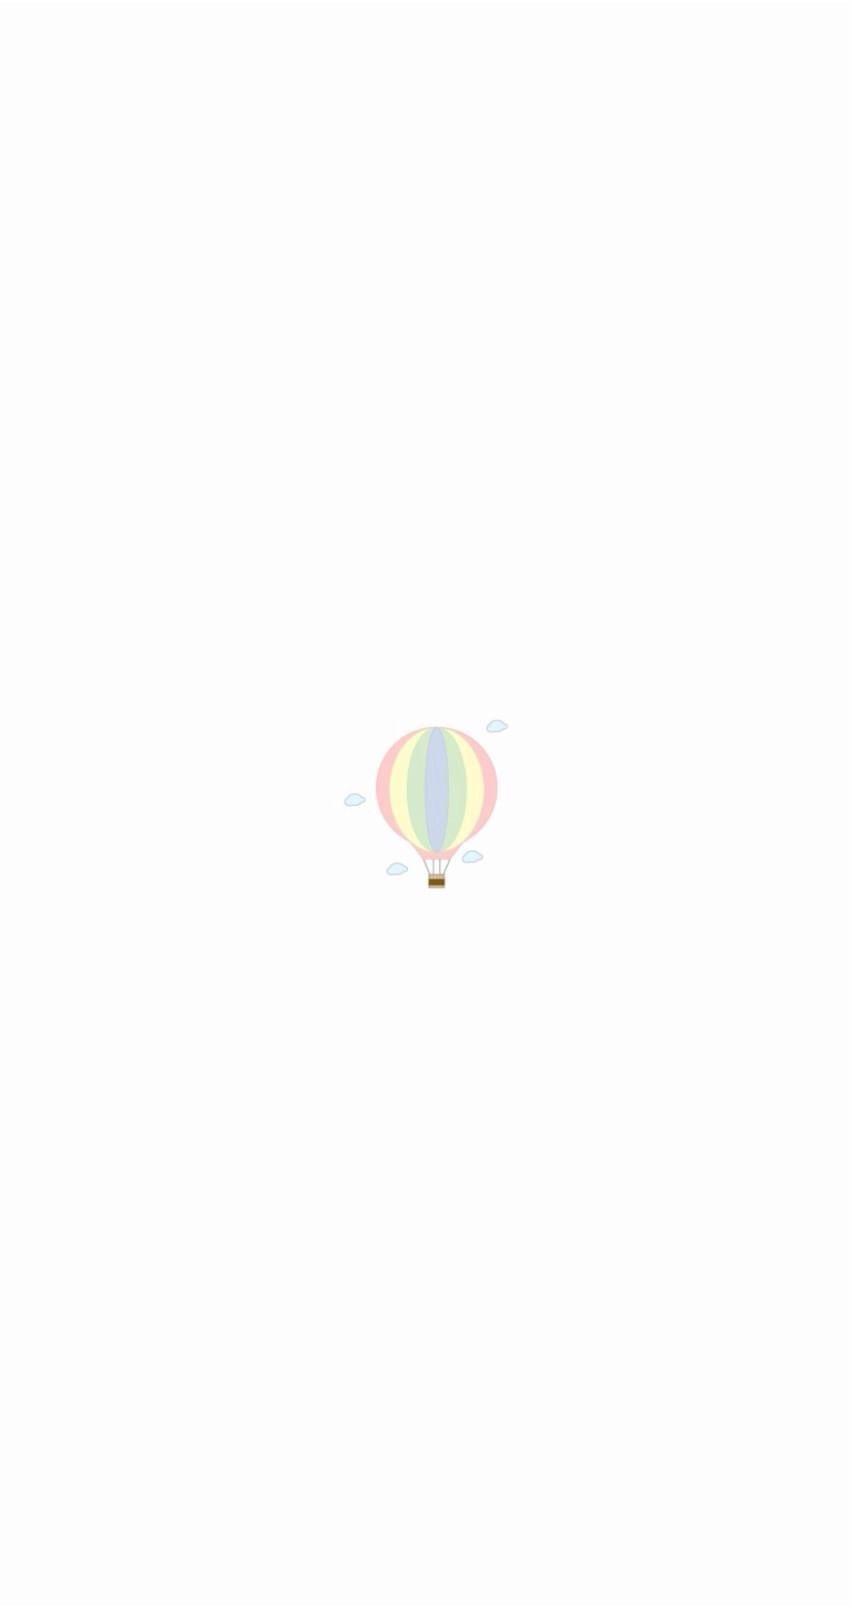 A hot air balloon is shown on the white background - Pastel minimalist